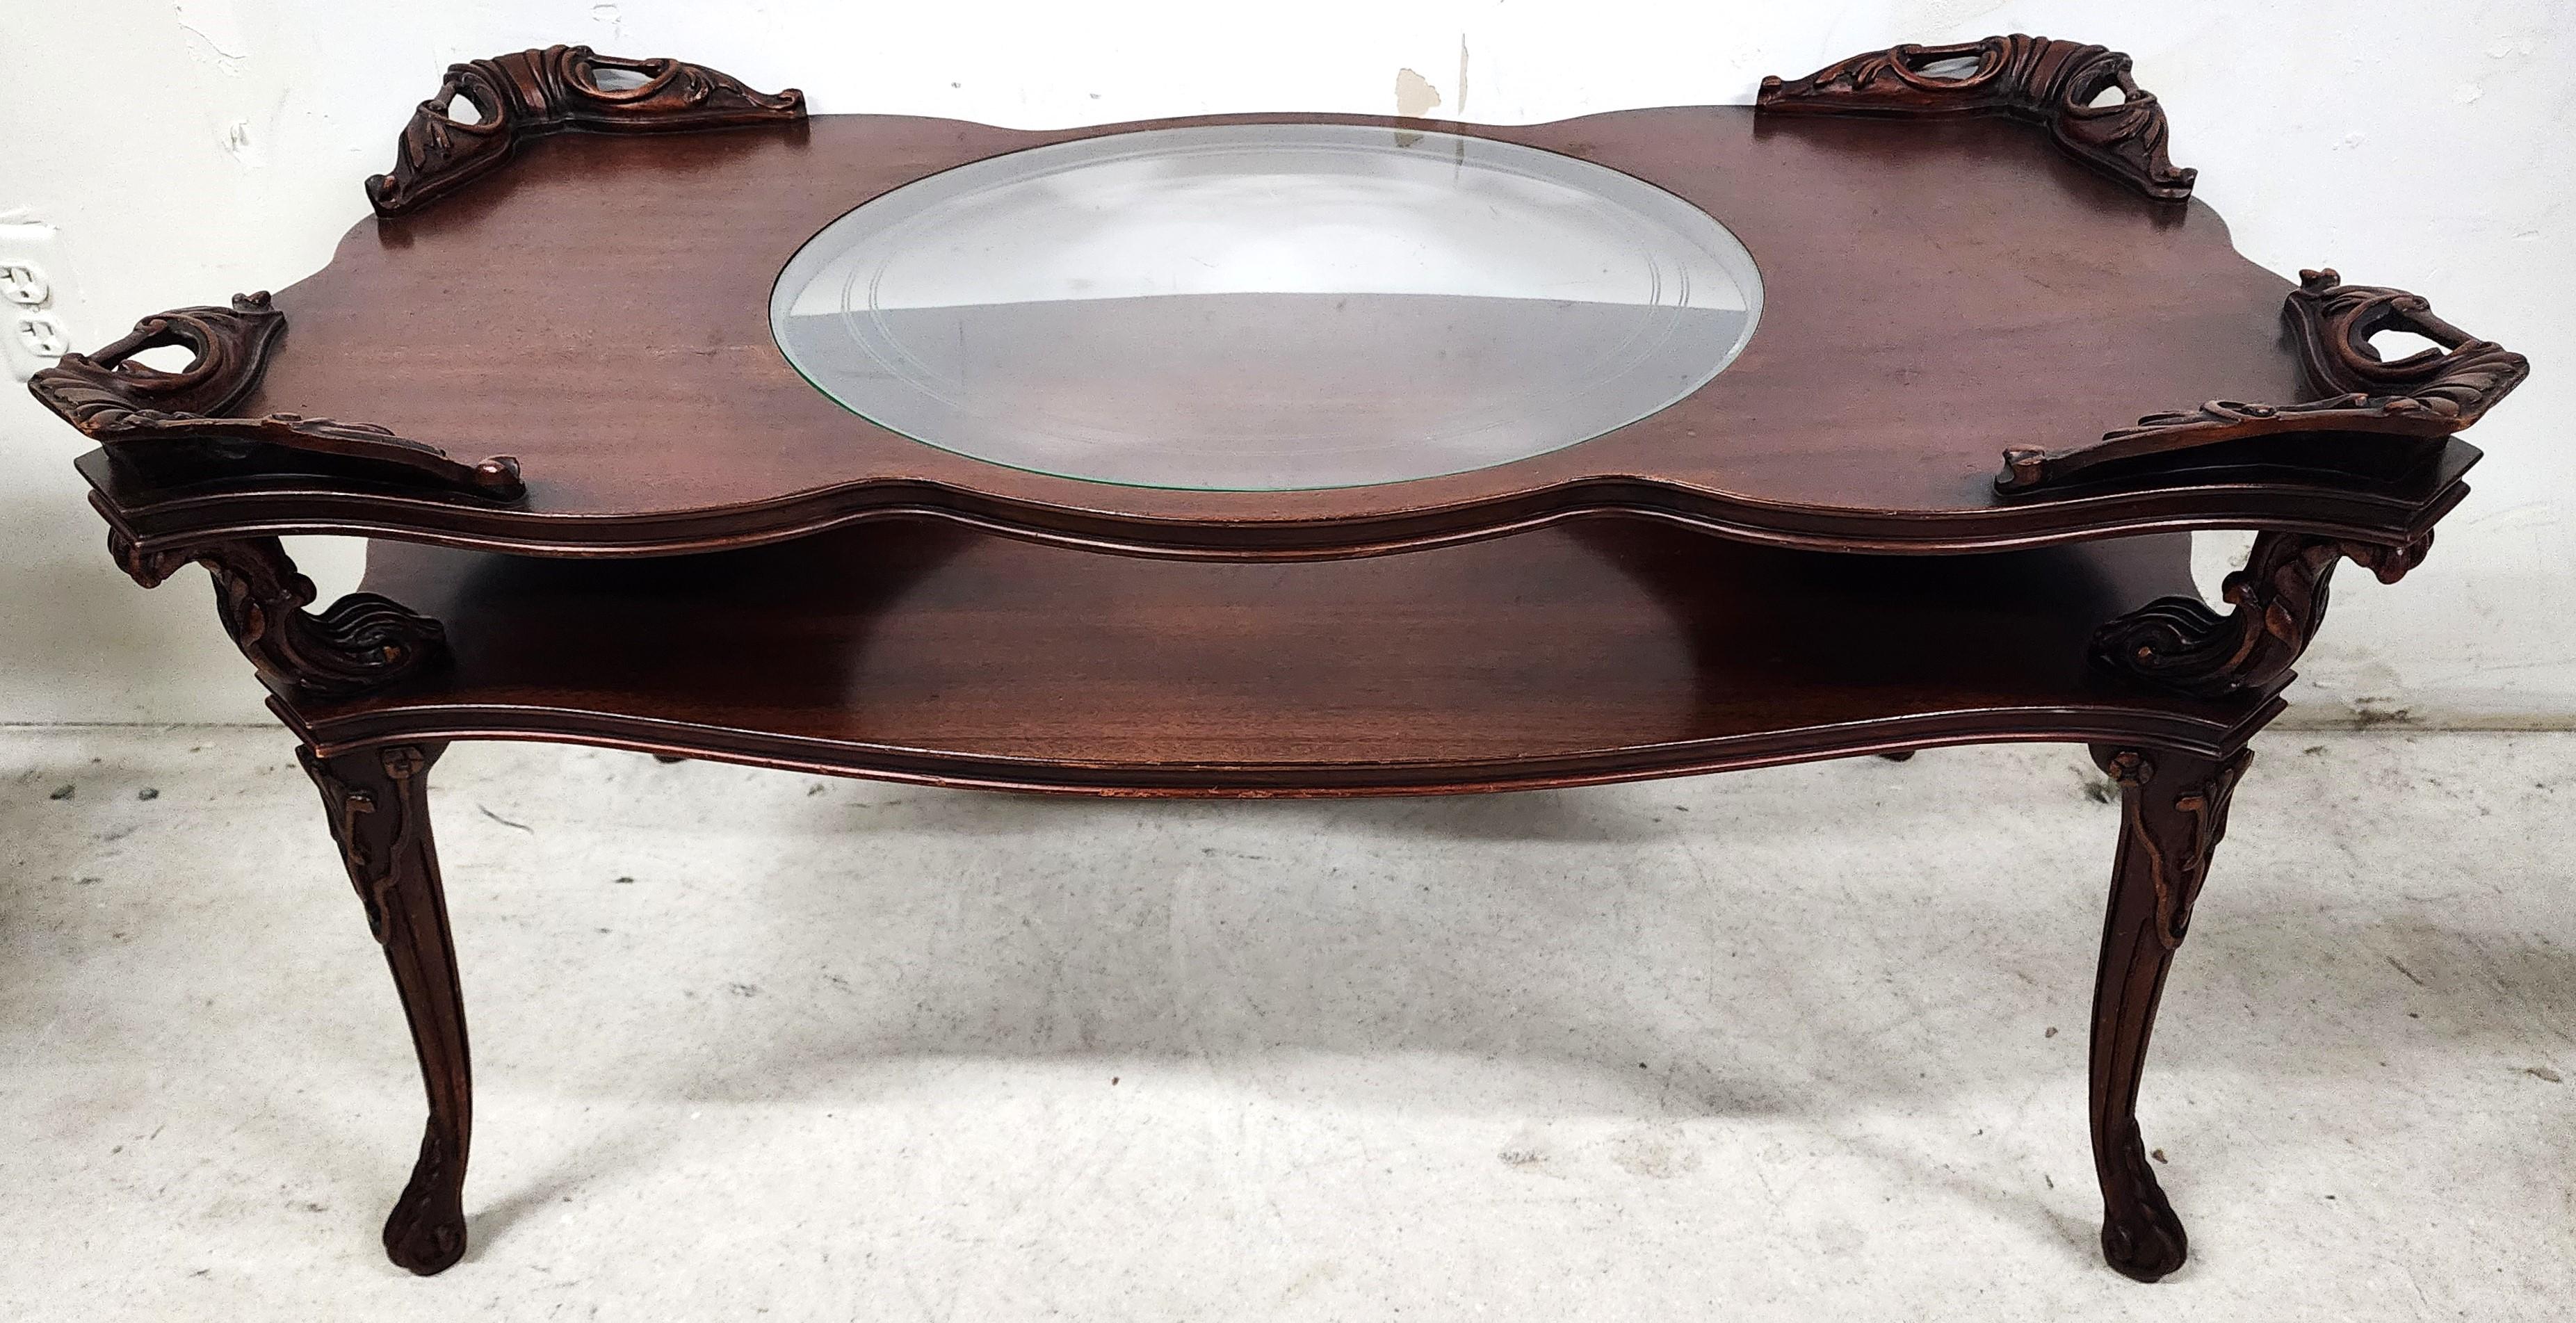 For FULL item description click on CONTINUE READING at the bottom of this page.

Offering One Of Our Recent Palm Beach Estate Fine Furniture Acquisitions Of An
Antique Coffee Table Louis XV by ADAMS ALWAYS

Adams Always Fine Furniture Louis XV style